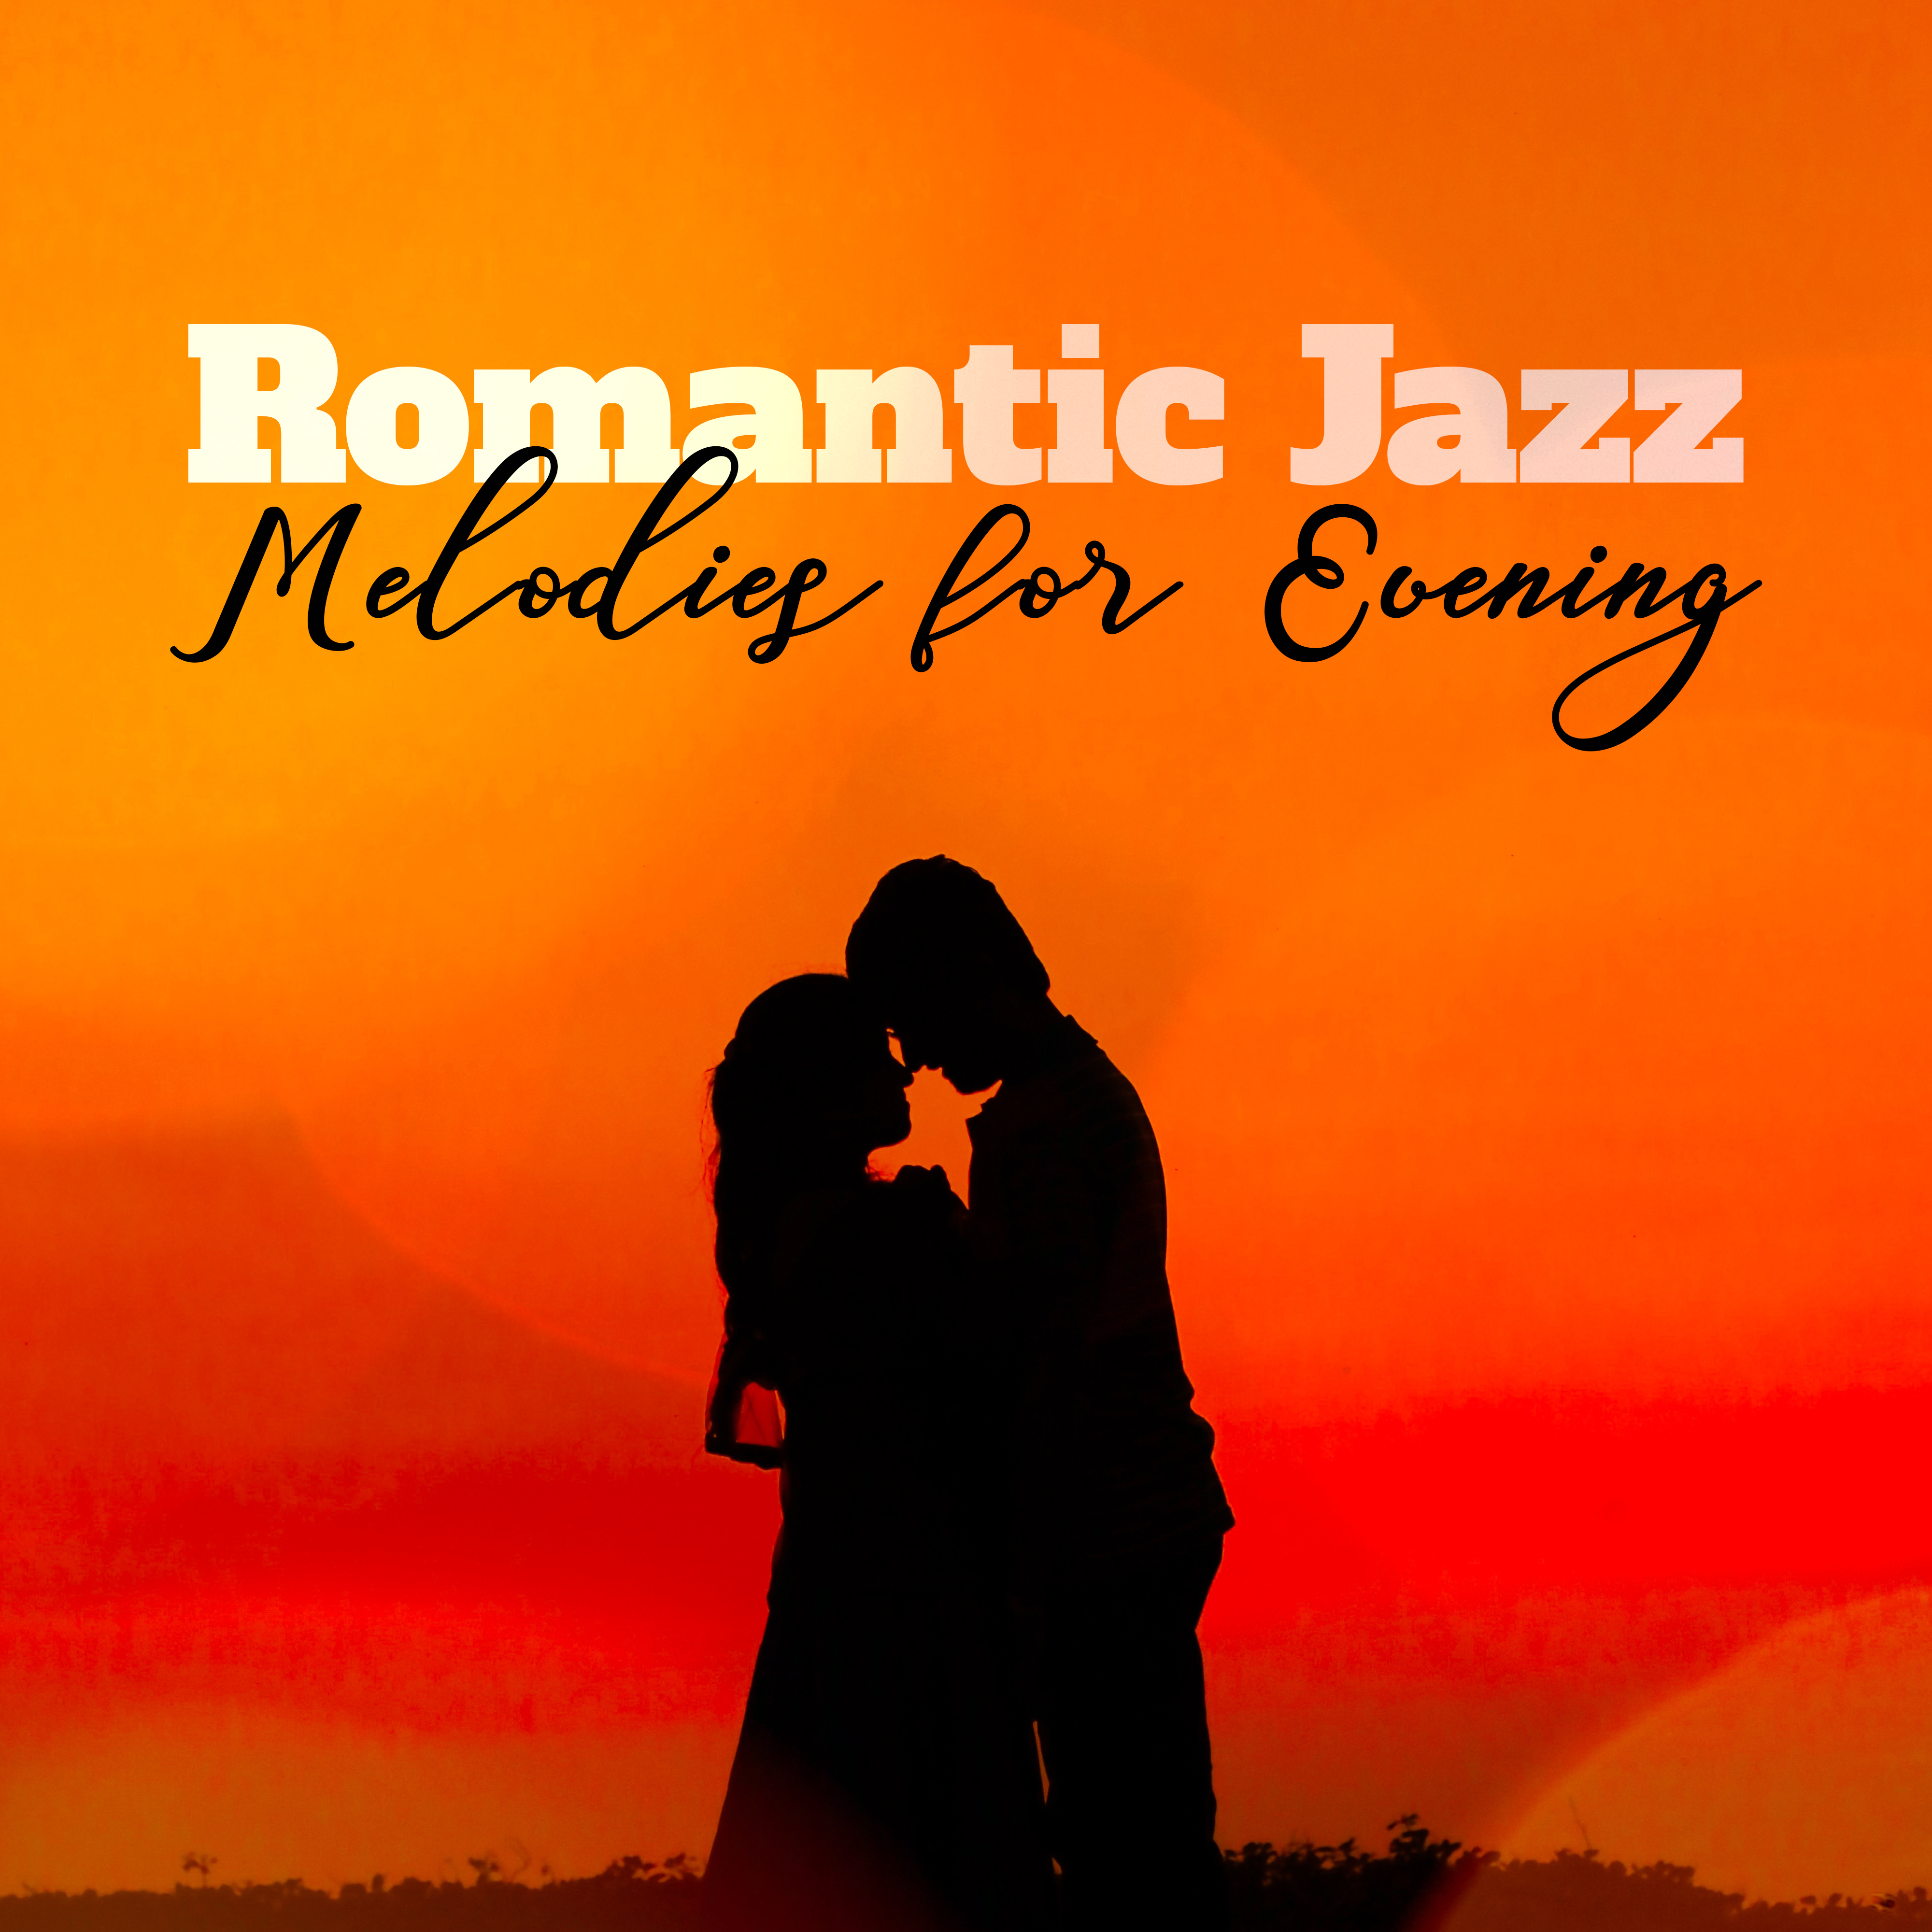 Romantic Jazz Melodies for Evening